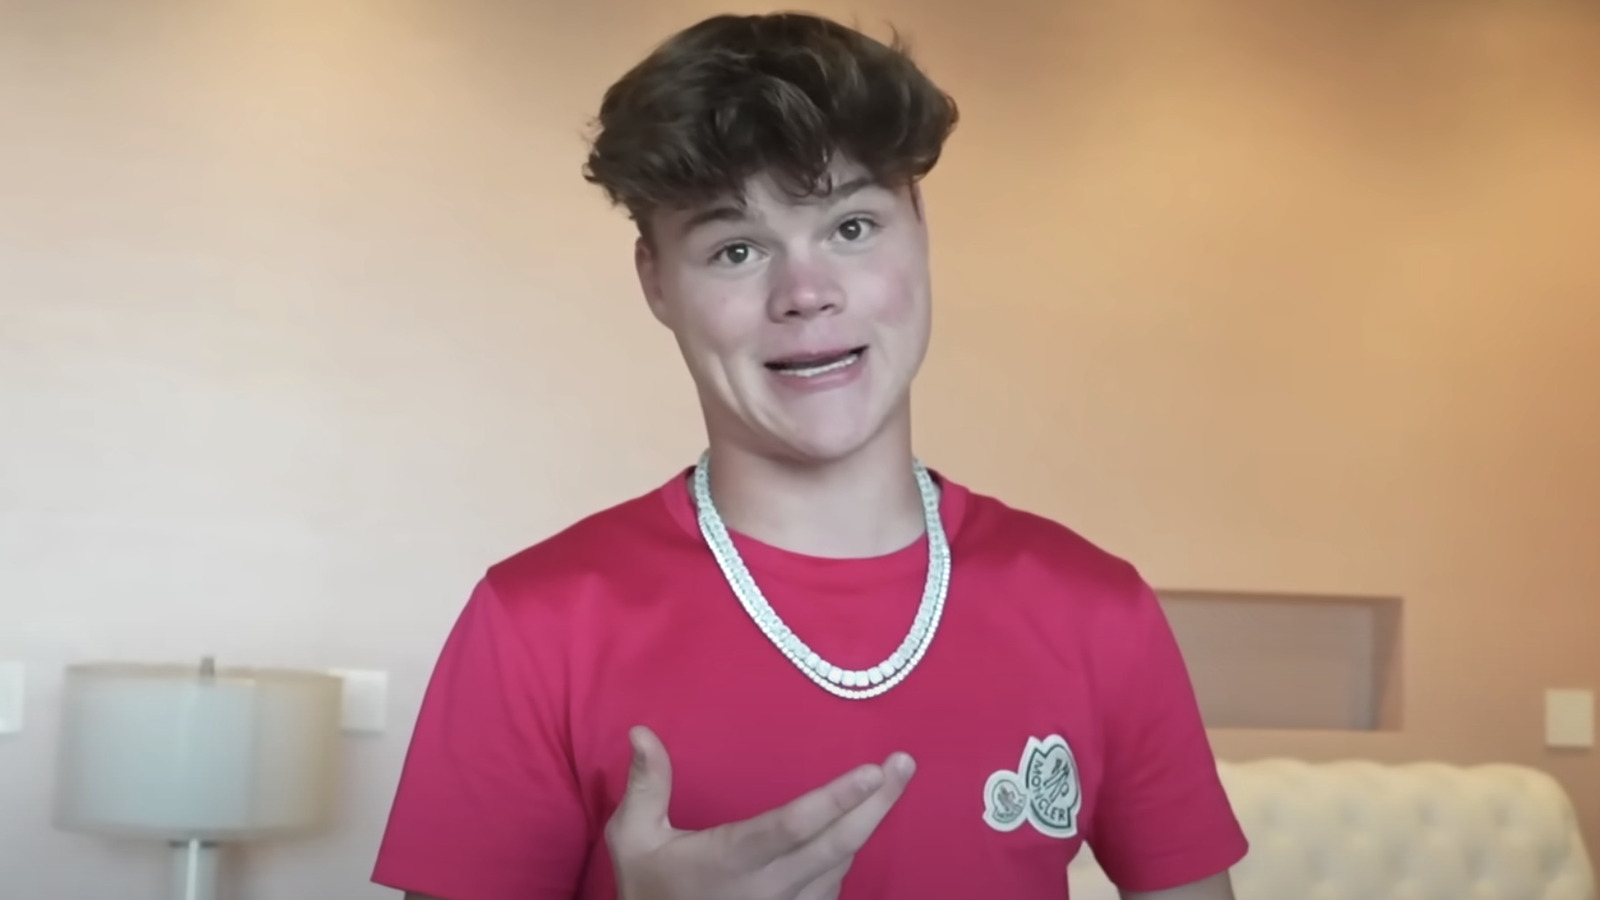 YouTuber Jack Doherty Sued For Assault And Battery Over Halloween Altercation